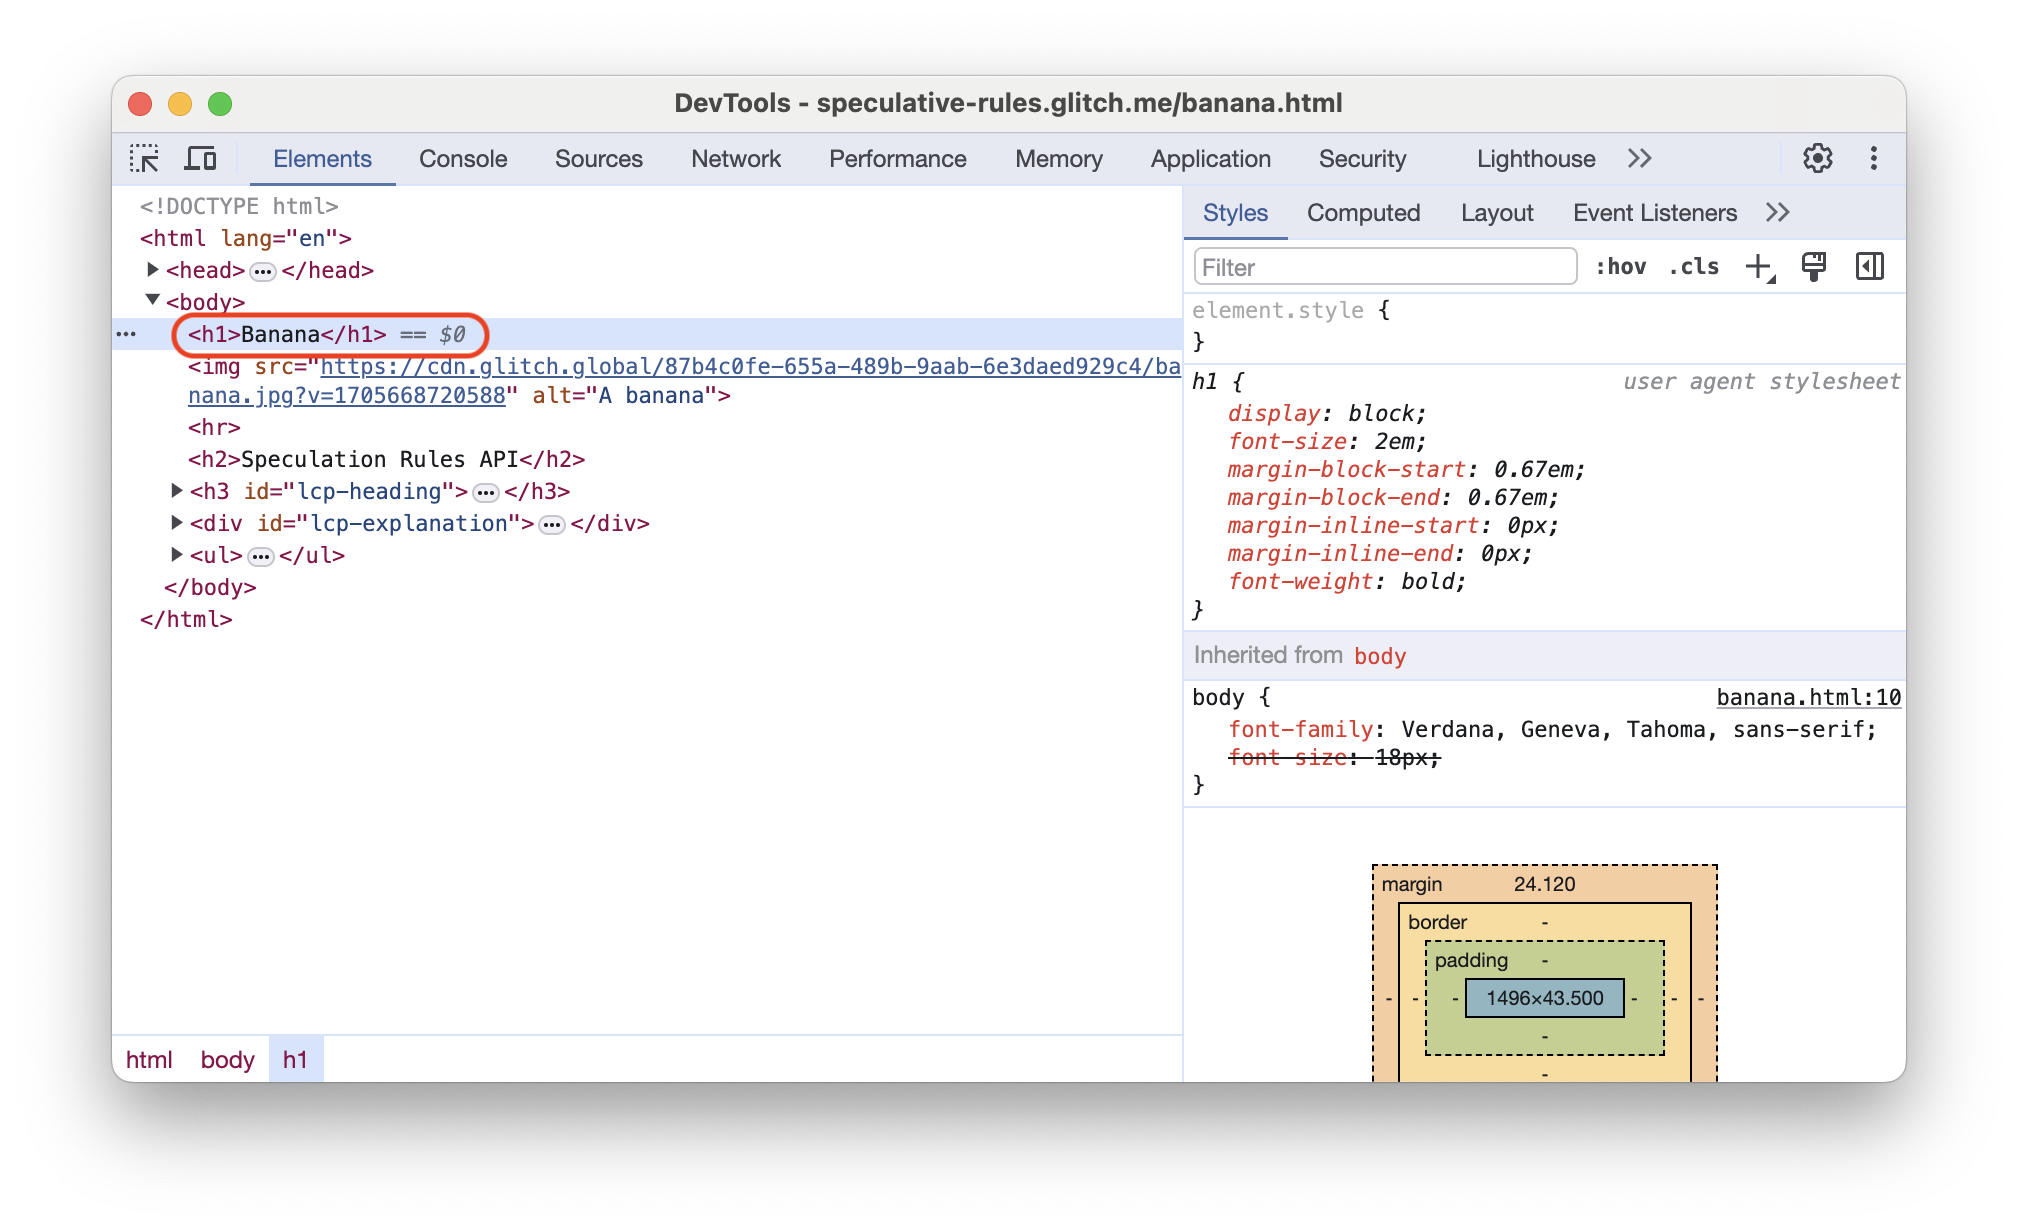 Chrome DevTools Elements panel for the prerendered page